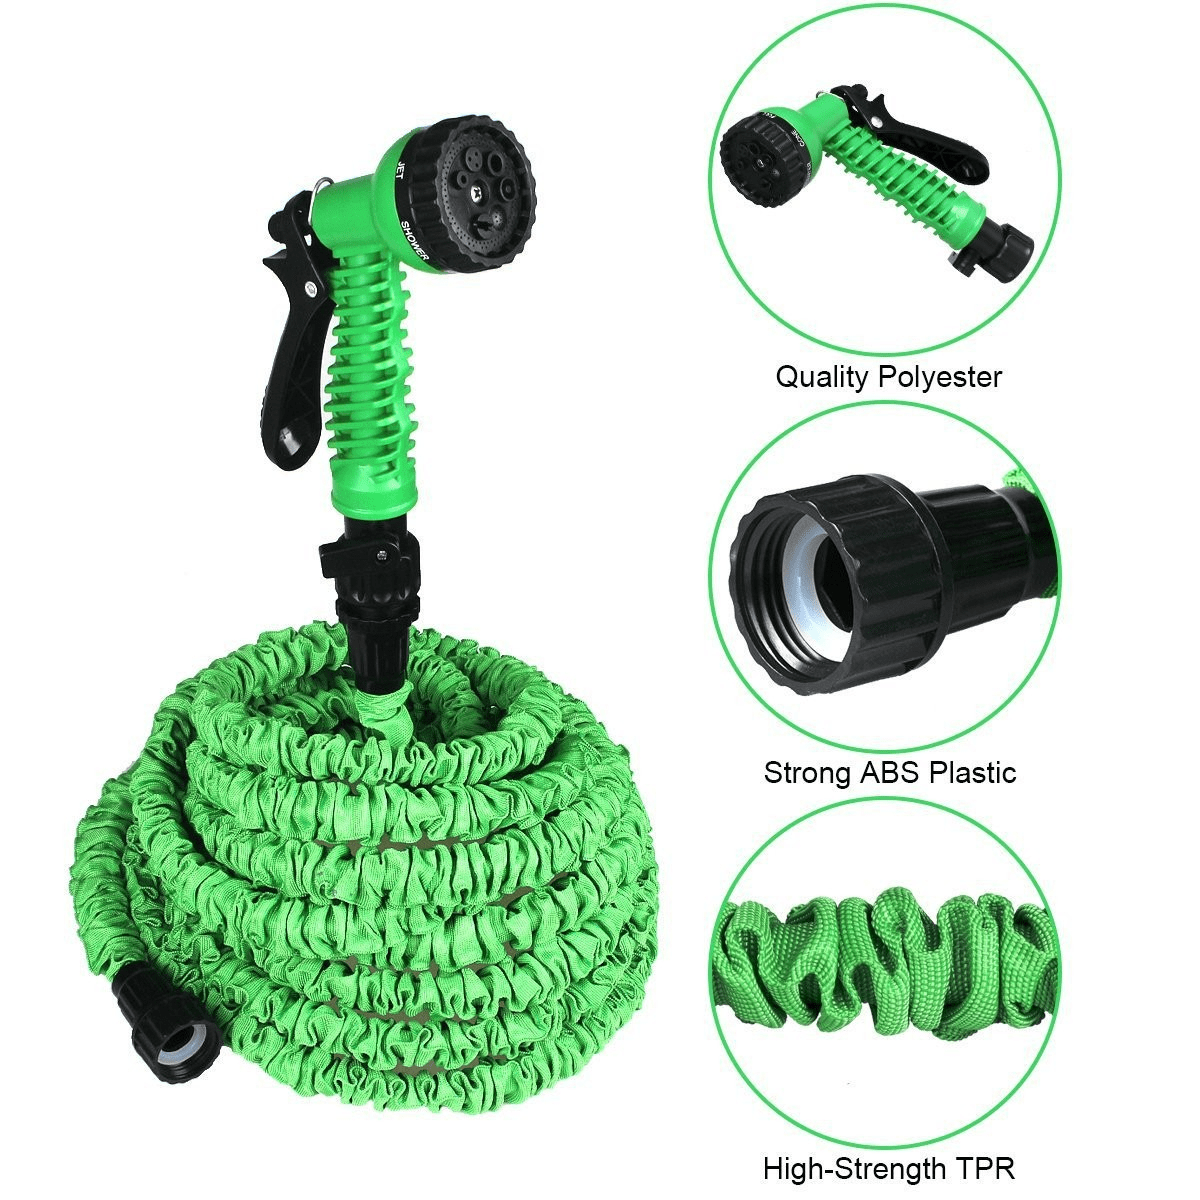 Expandable Flexible Garden Hose with Nozzle - Choose Your Length: 25FT, 50FT, 75FT, or 100FT